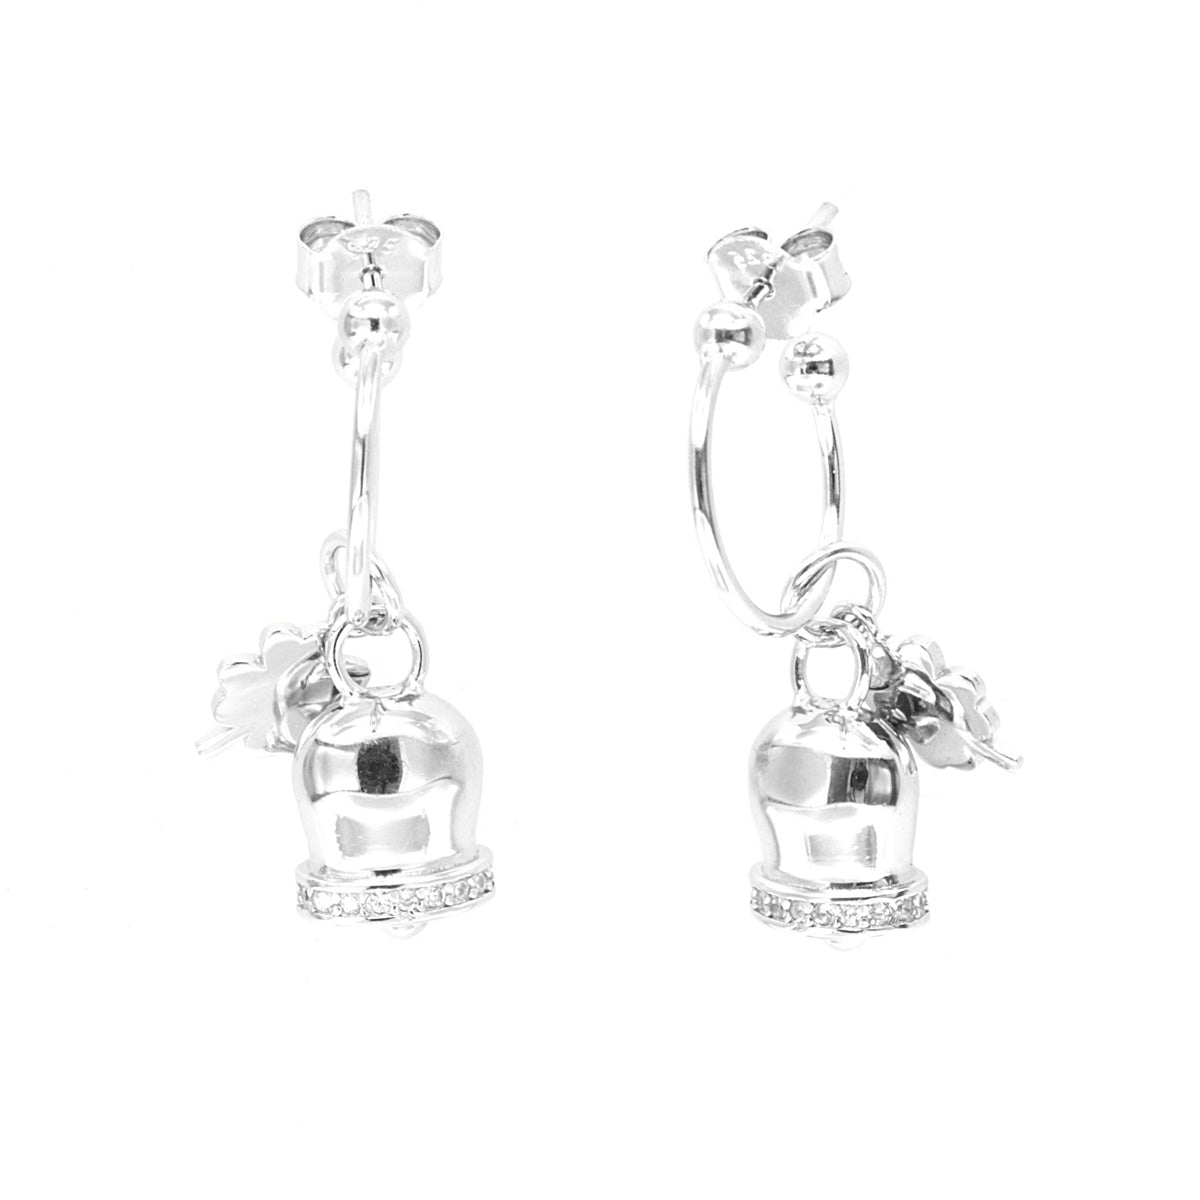 925 silver earrings with pan -shaped pendants and four -leaf clover